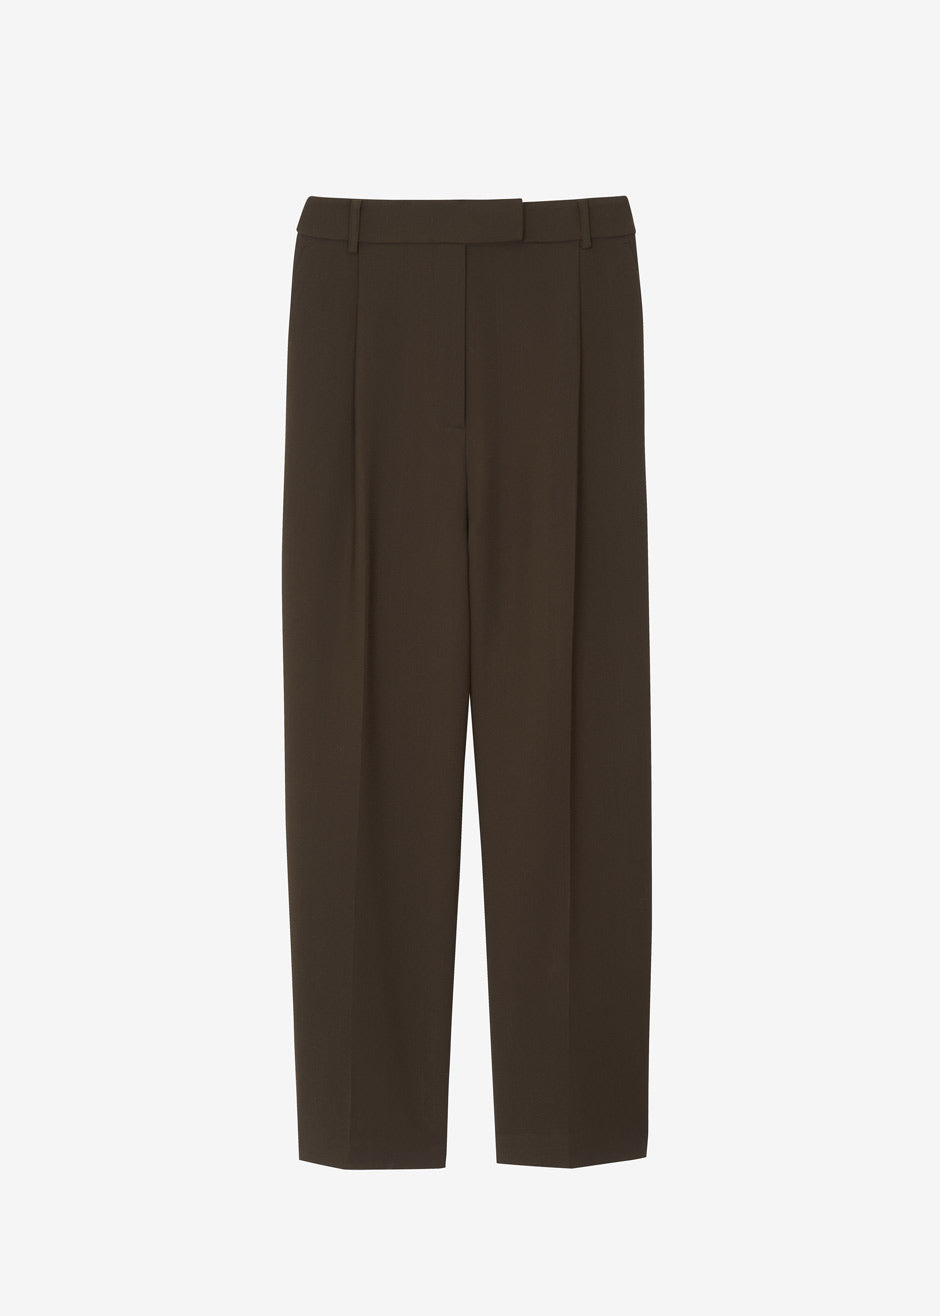 Zephyr Suit Trousers - Chocolate - 9